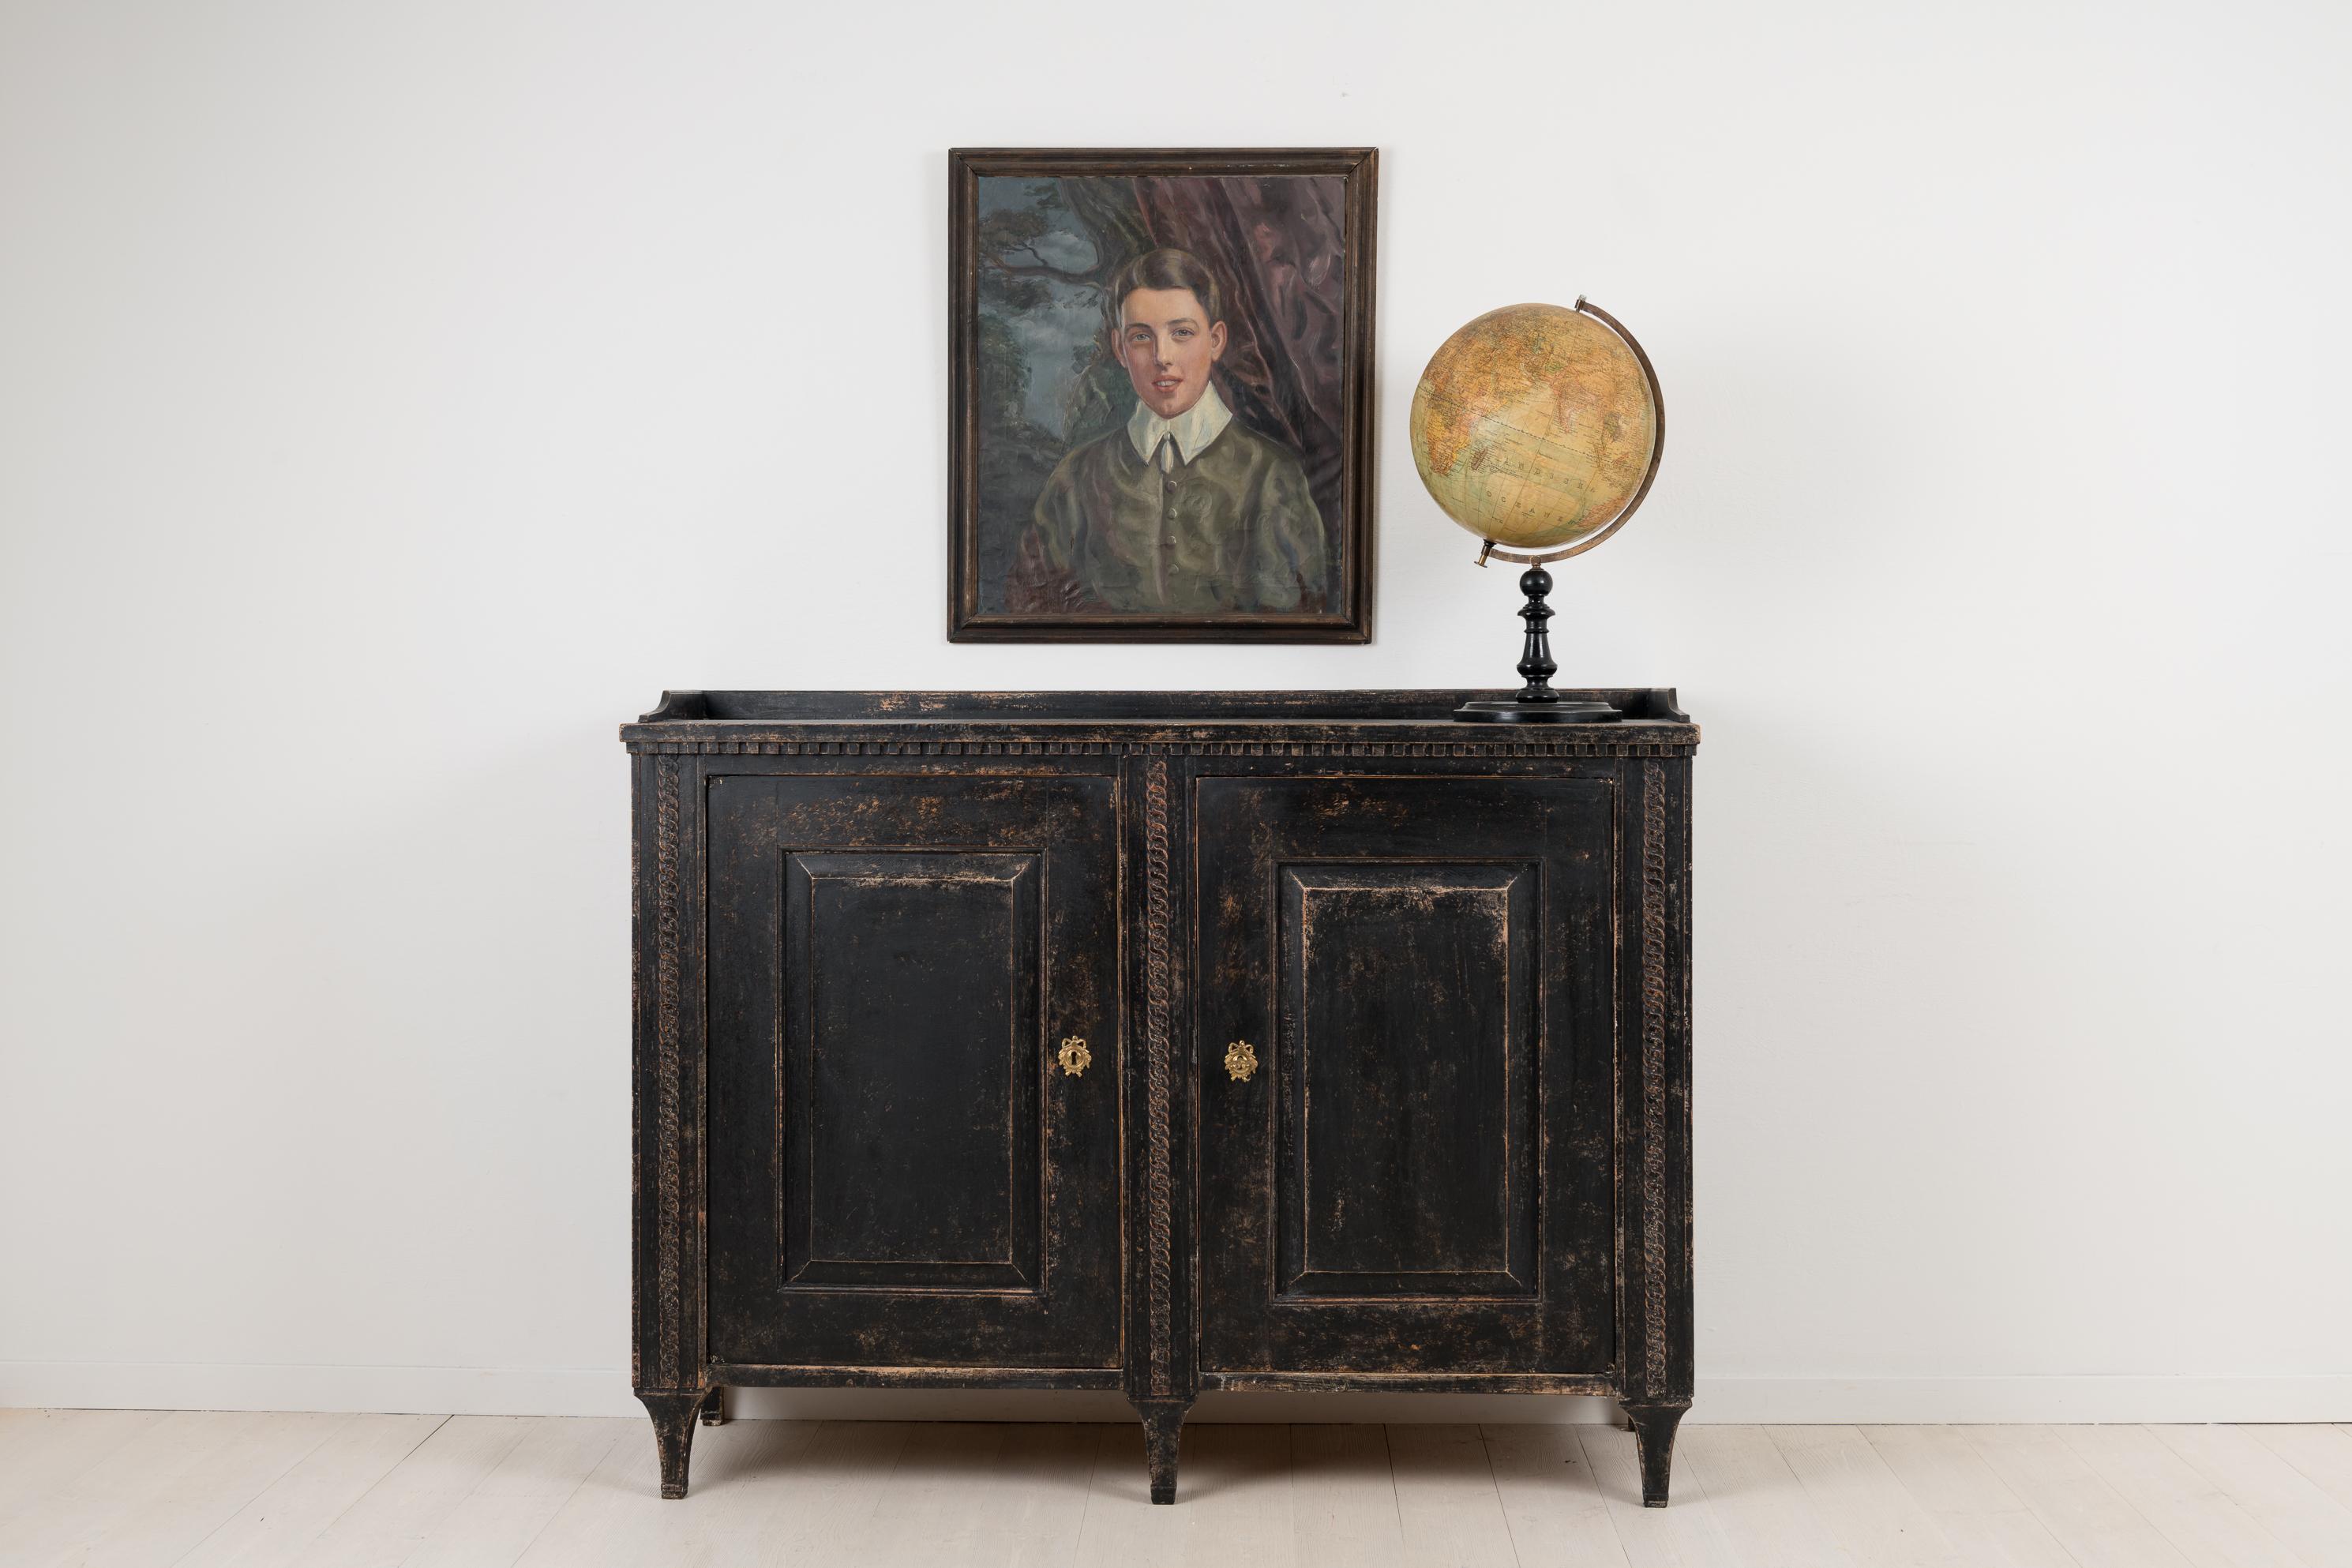 Neoclassical sideboard from northern Sweden. The sideboard is made circa 1790 from Swedish pine. It is unusually decorated with hand carved wooden decorations such as the three carved chains going vertically from top to bottom. The lock and key are